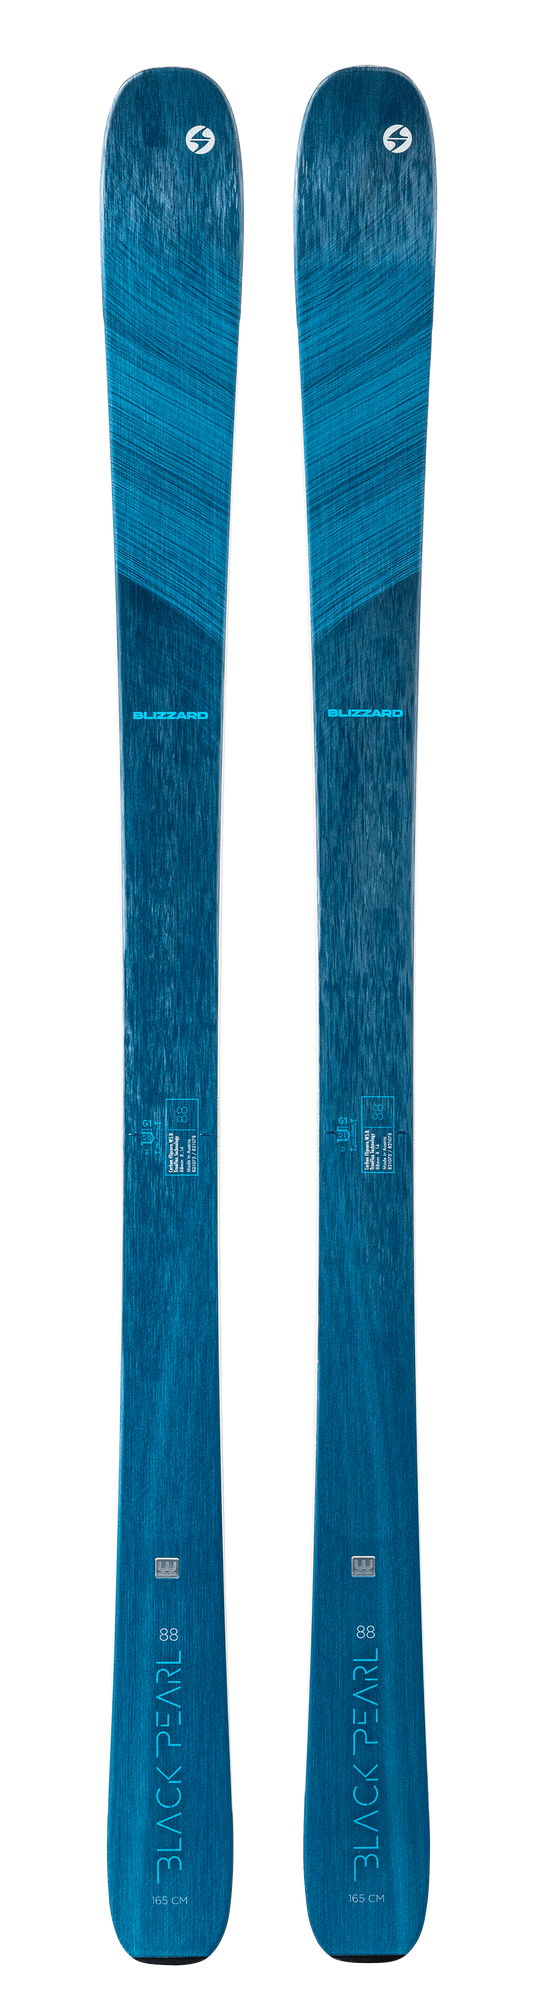 New Women's Blizzard 177cmBlack Pearl 88 Skis Without Bindings (SY1504)